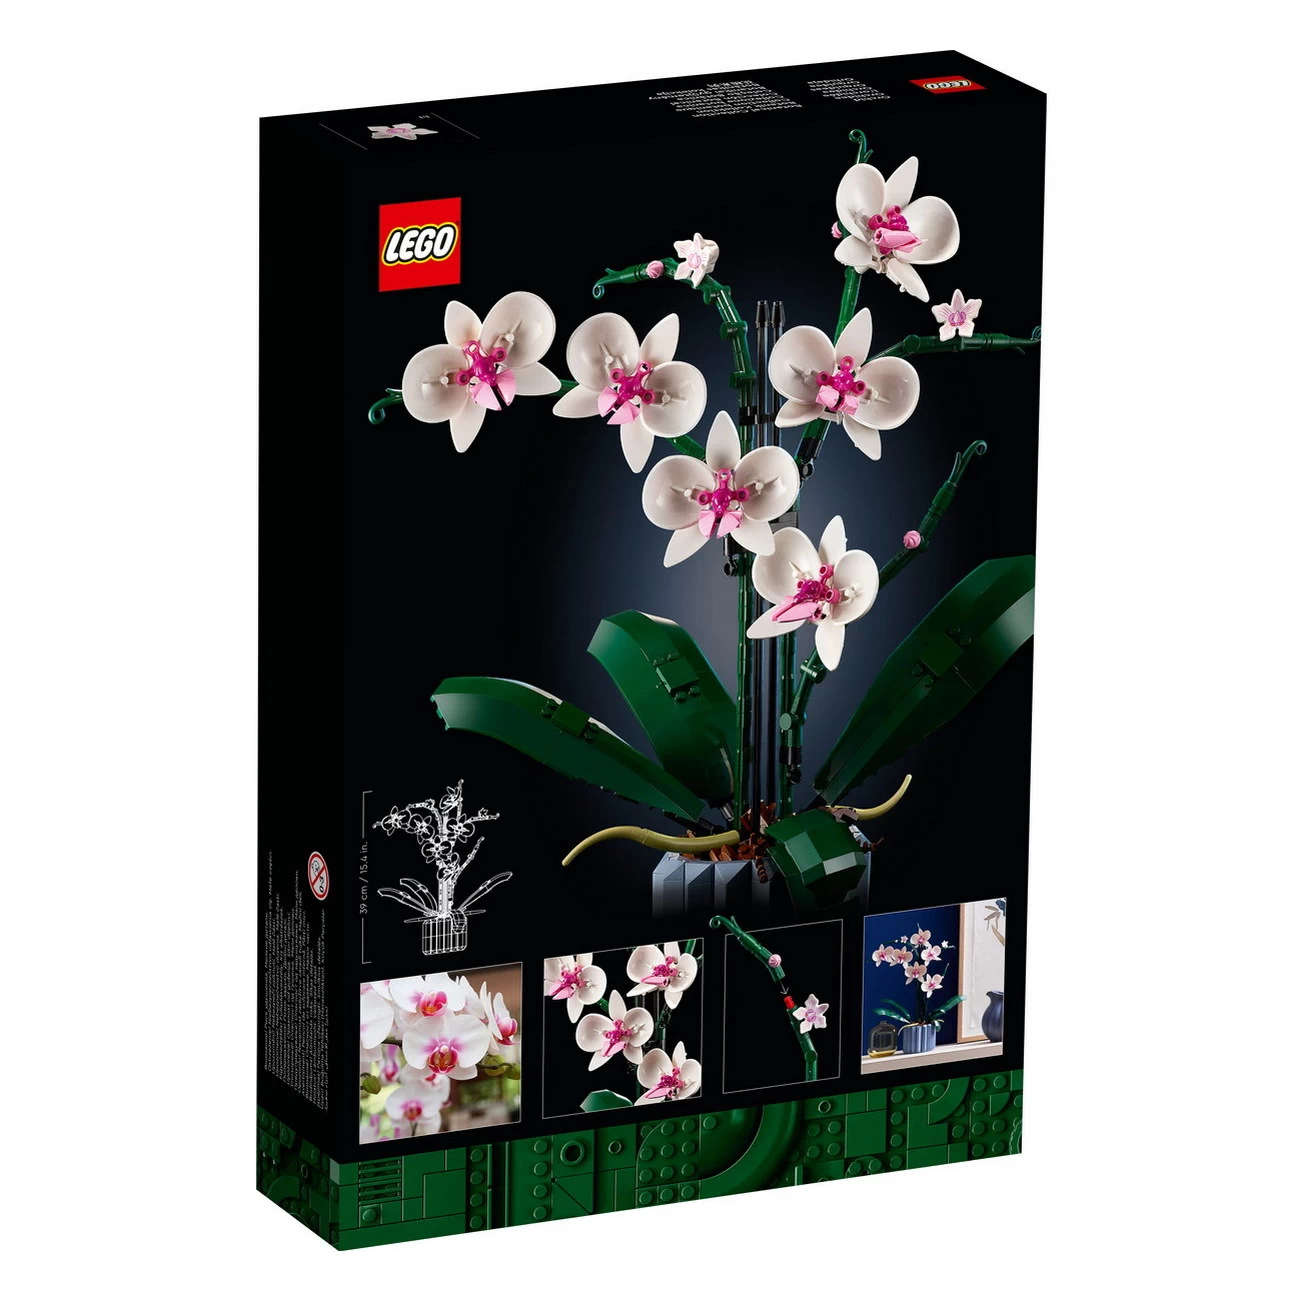 LEGO Icons 10311 - Orchidee